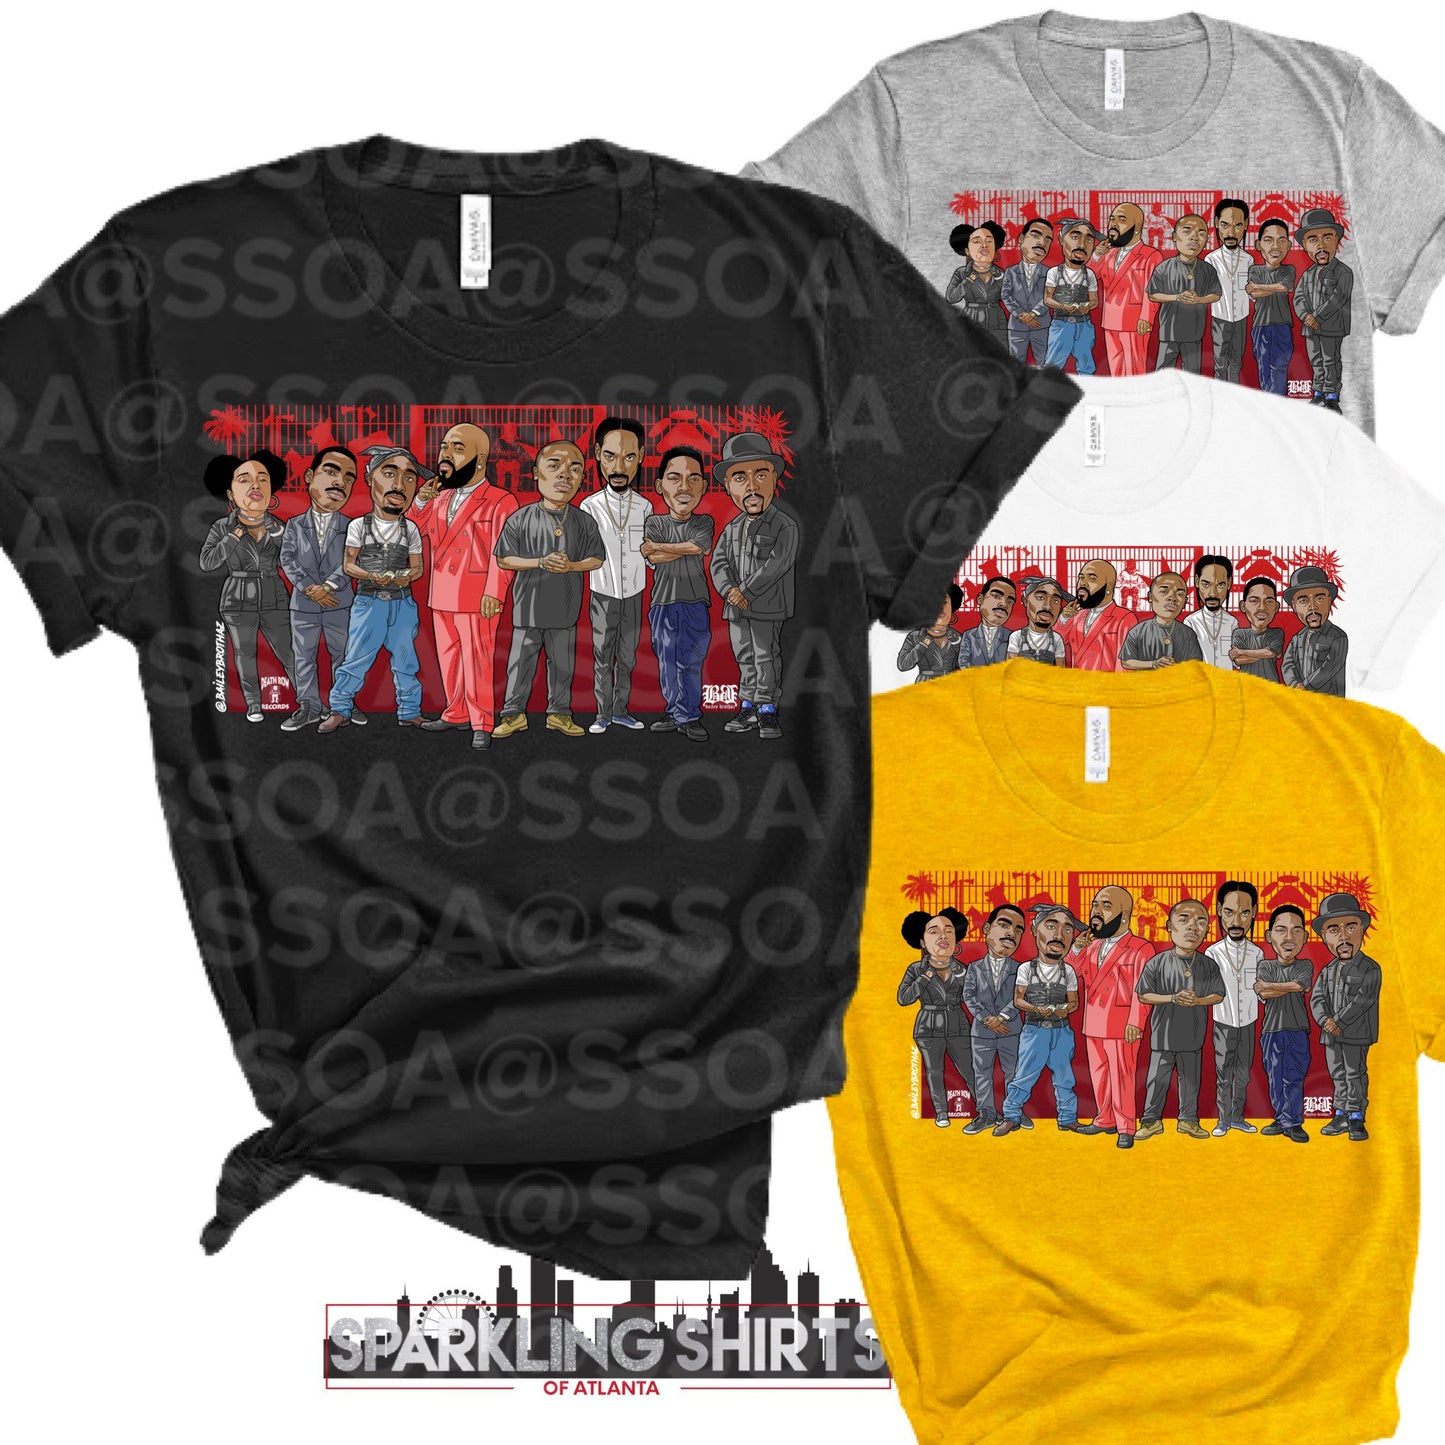 Death Row Records| Music| Rap| Fun T-shirts | Everyday| Graphic T-shirt